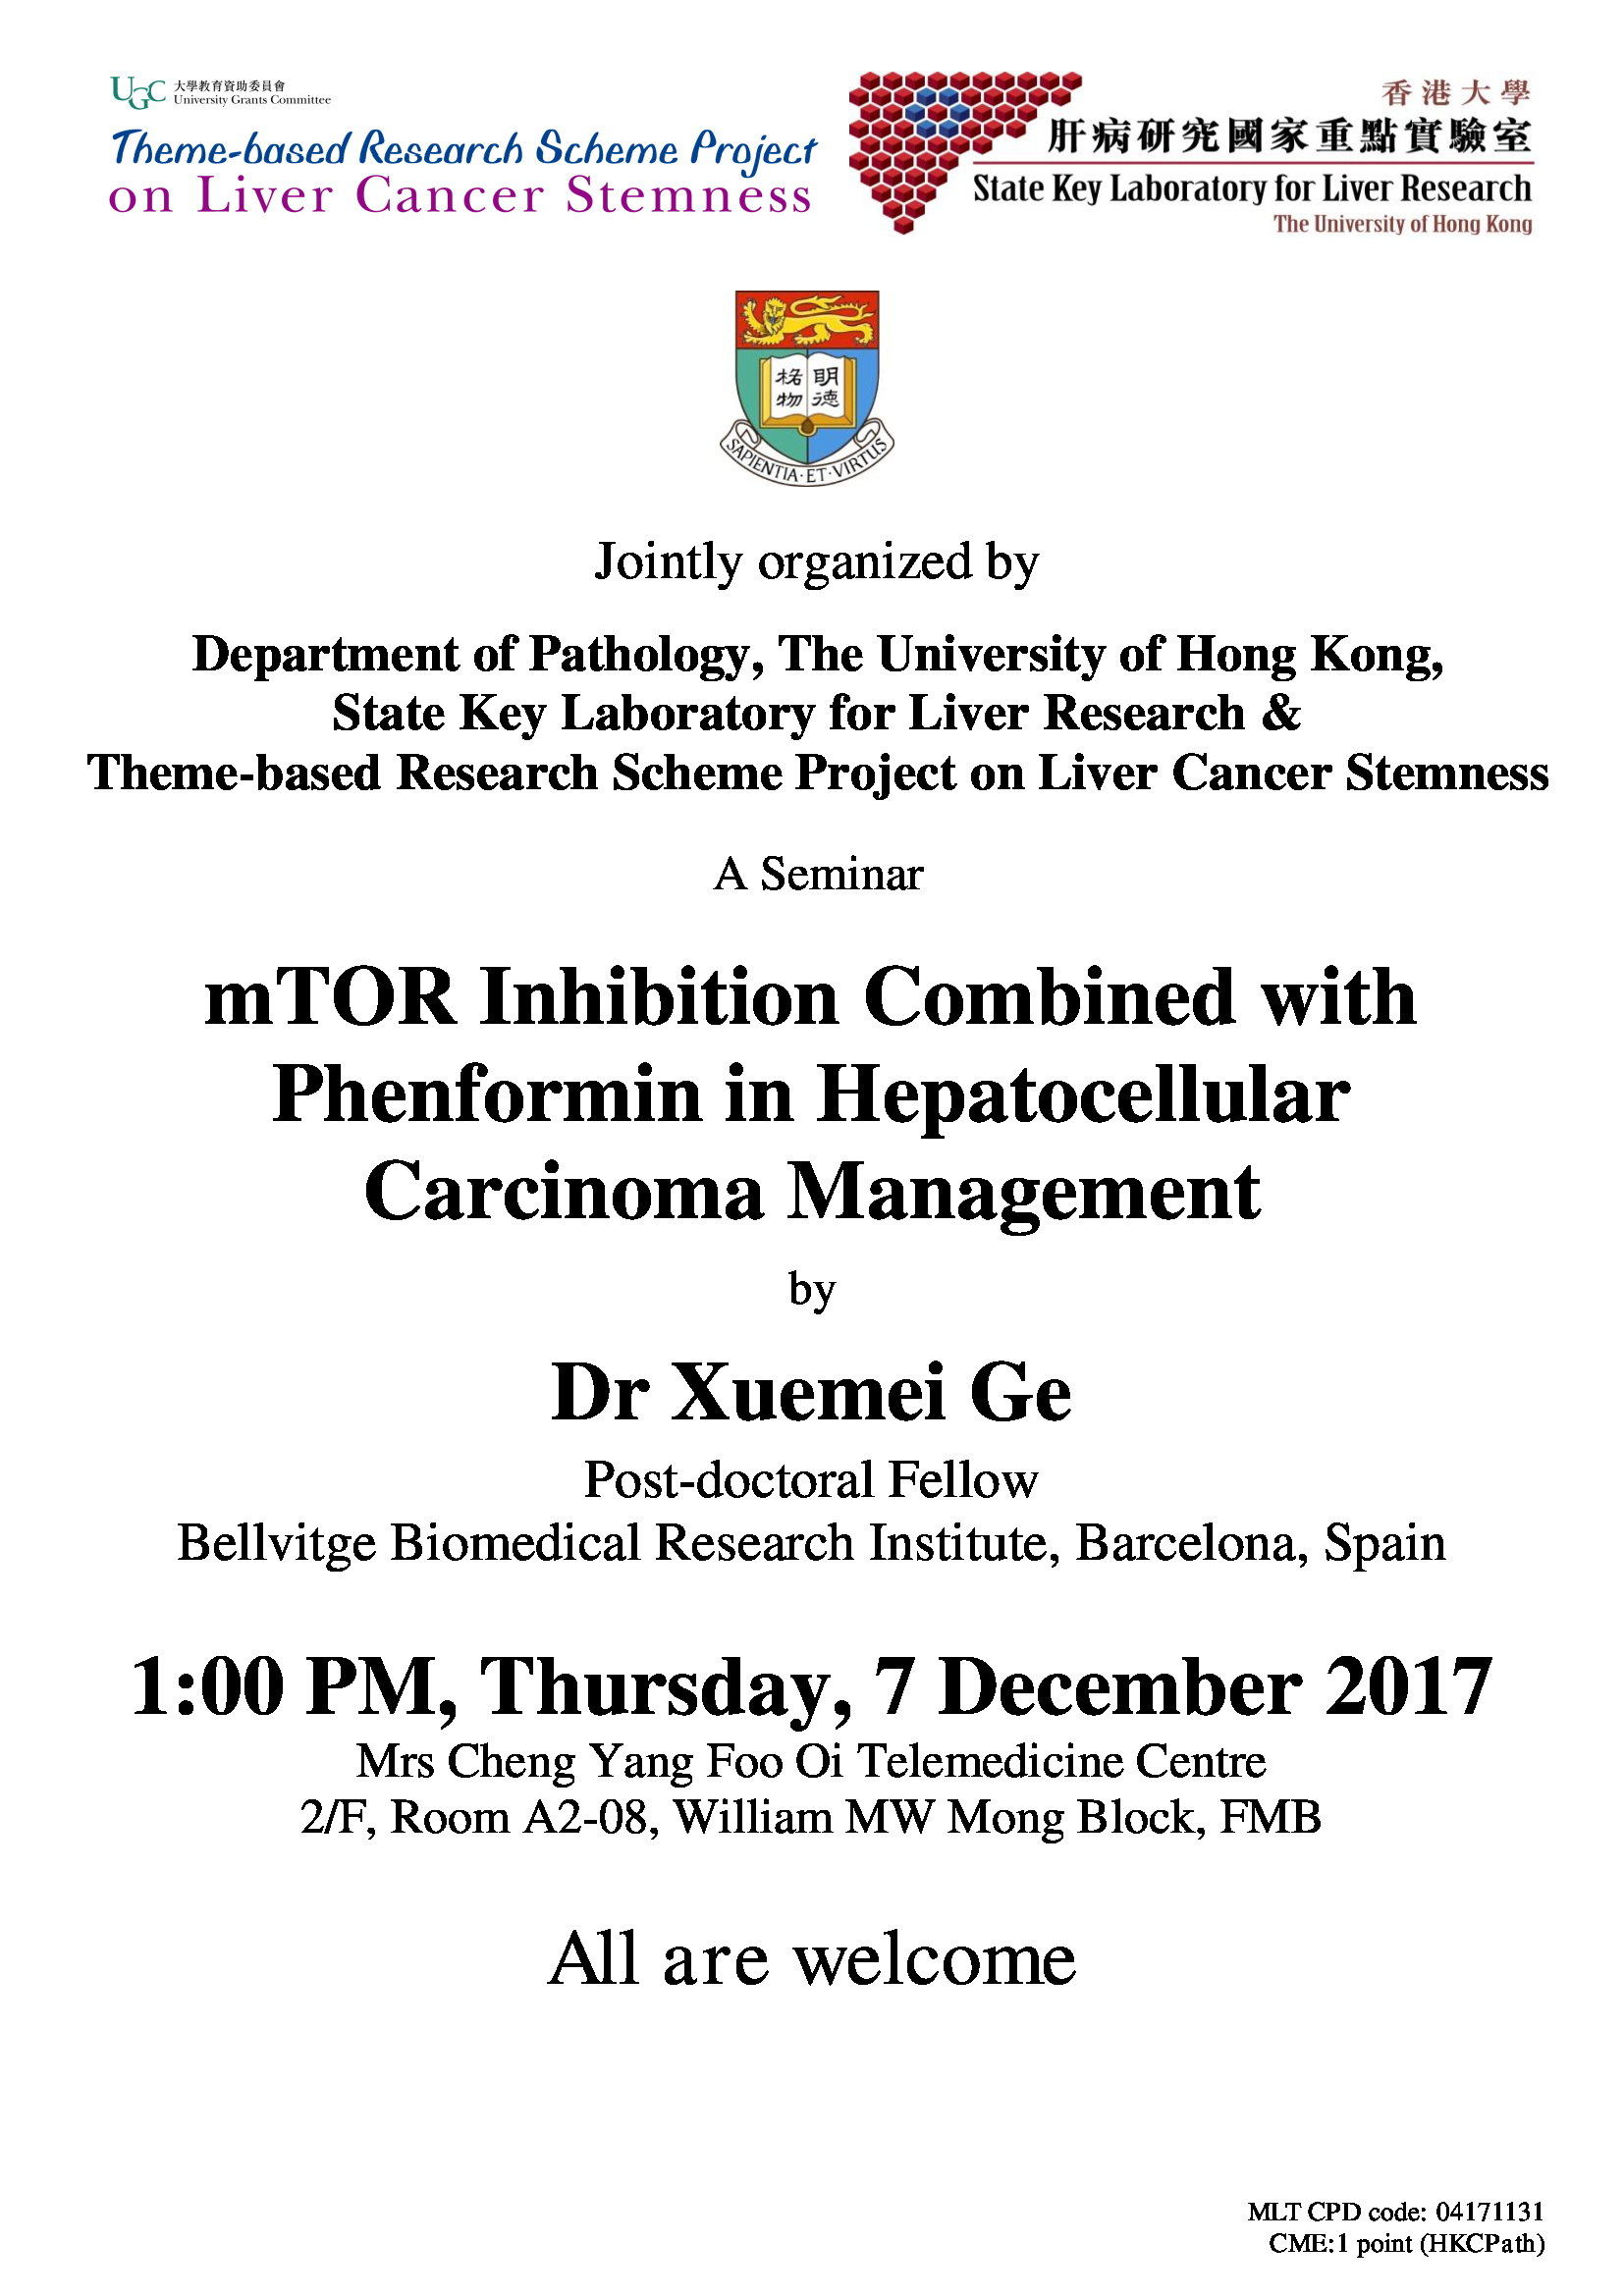 A Seminar mTOR Inhibition Combined with Phenformin in Hepatocellular Carcinoma Management by Dr Xuemei Ge on 7 Dec (1 pm)